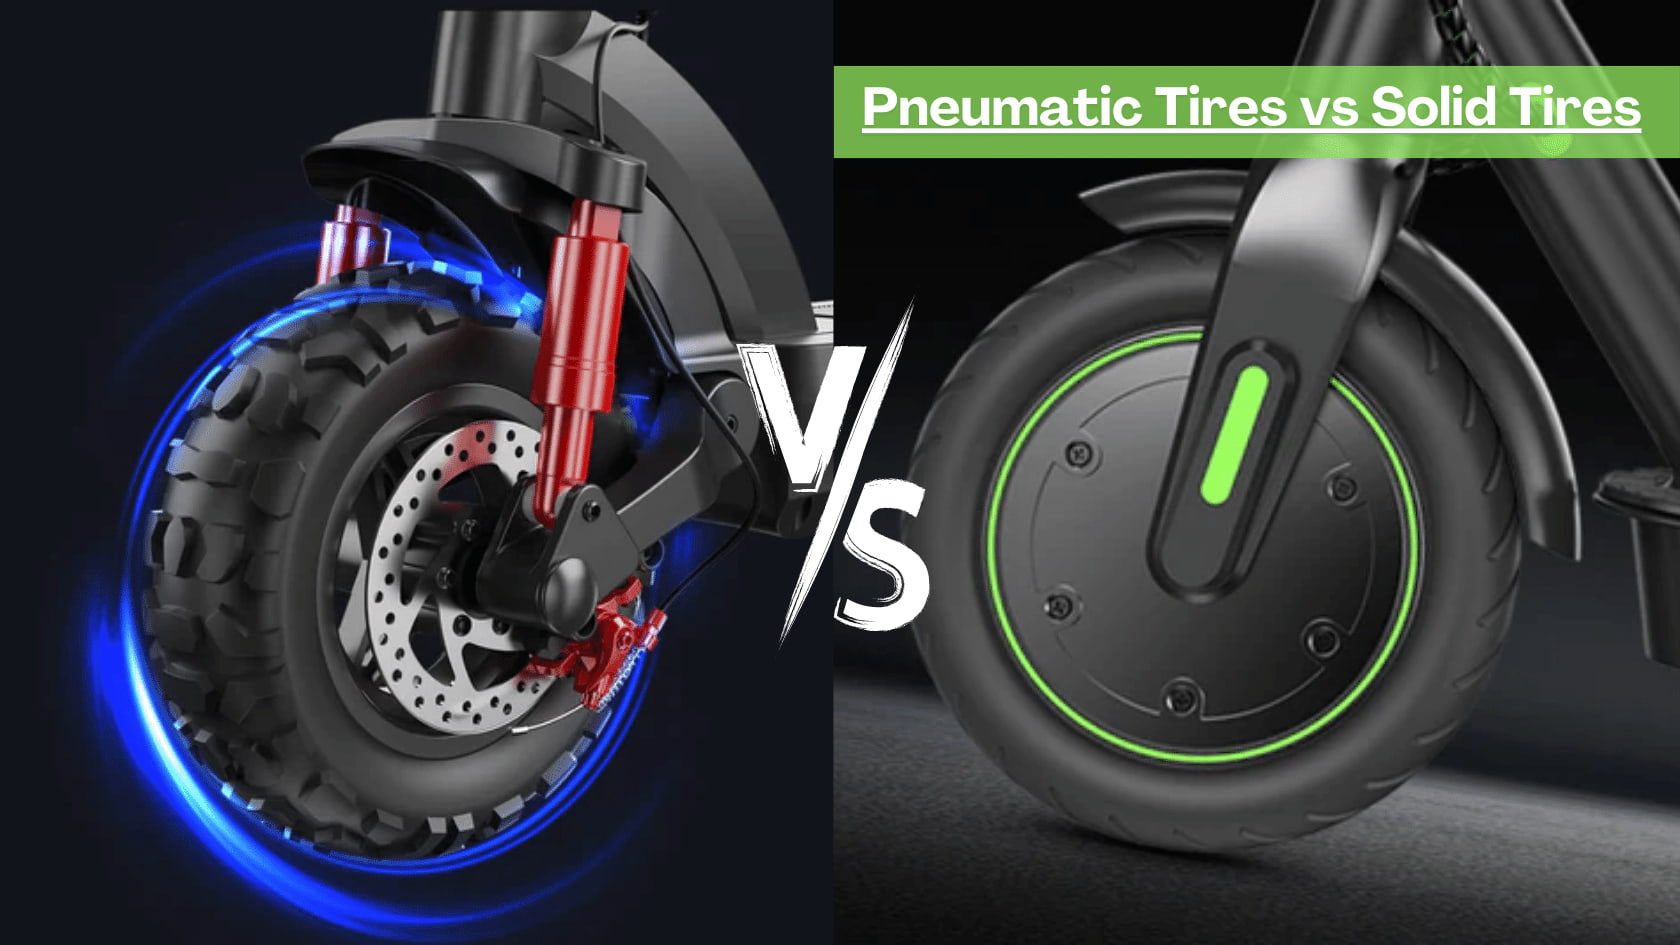 Electric Scooter: Pneumatic vs Solid Tires - Which is Better?